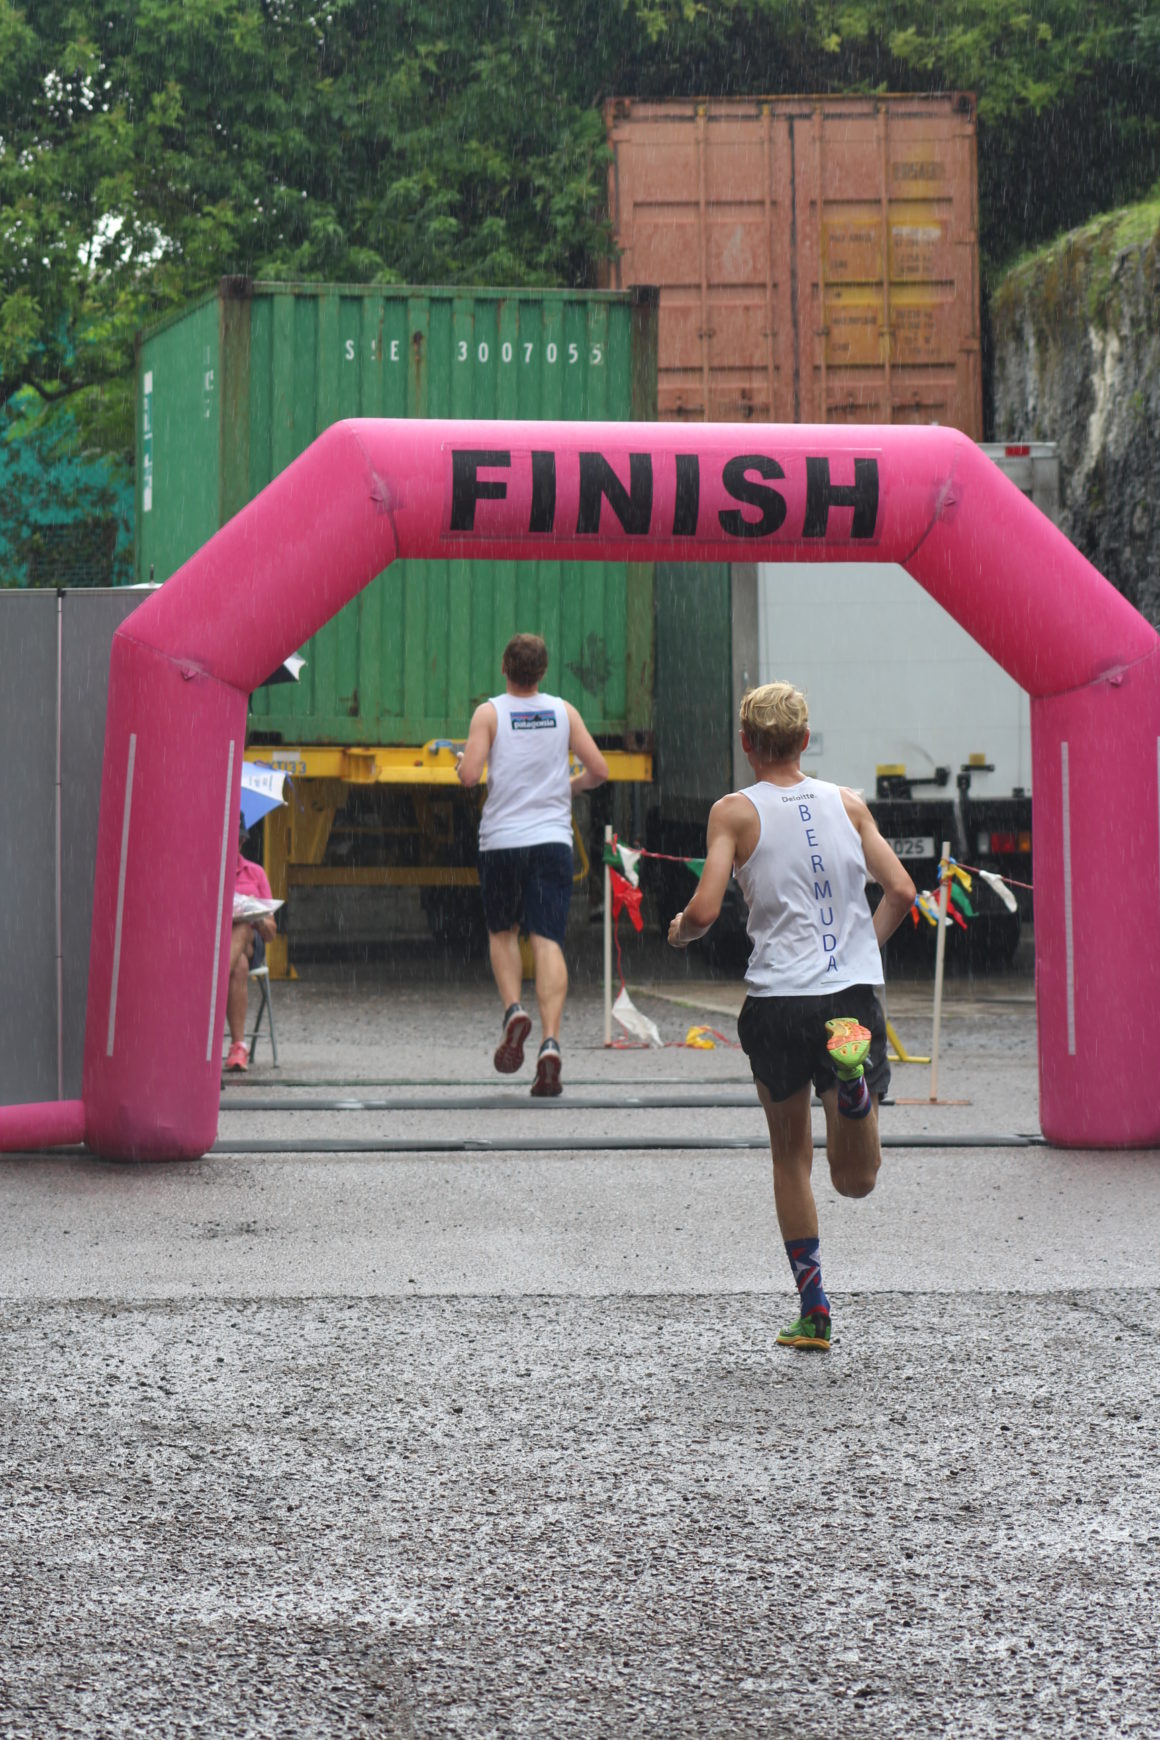 CONGRATULATIONS TO ALL FINISHERS IN THE NATURE VALLEY 5K